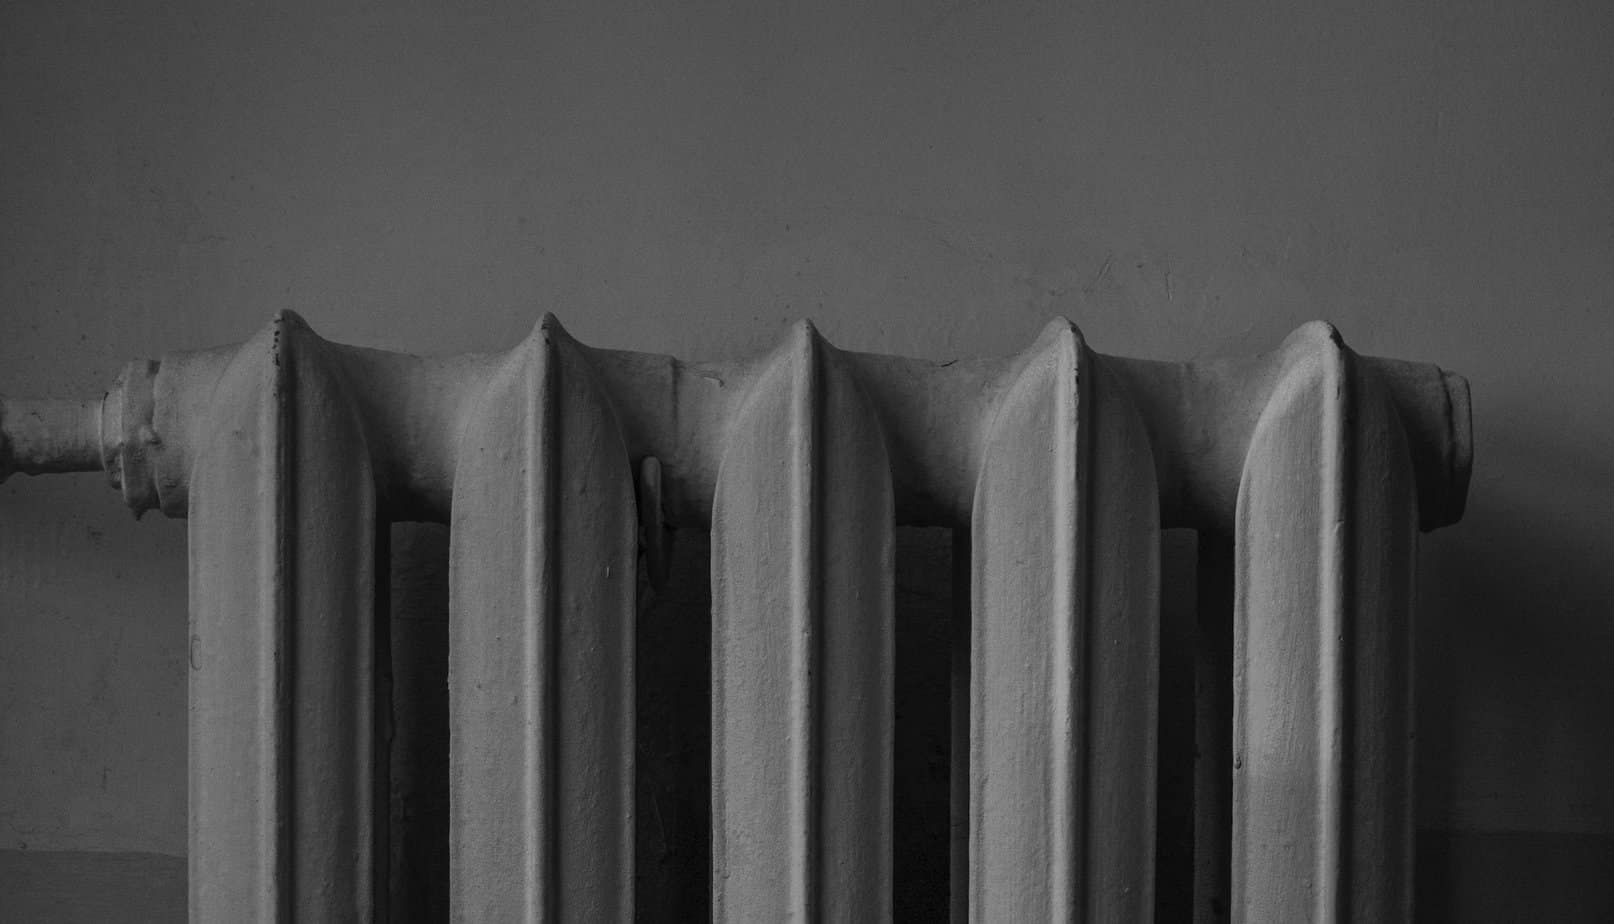 Cast iron radiator – to enclose or not?